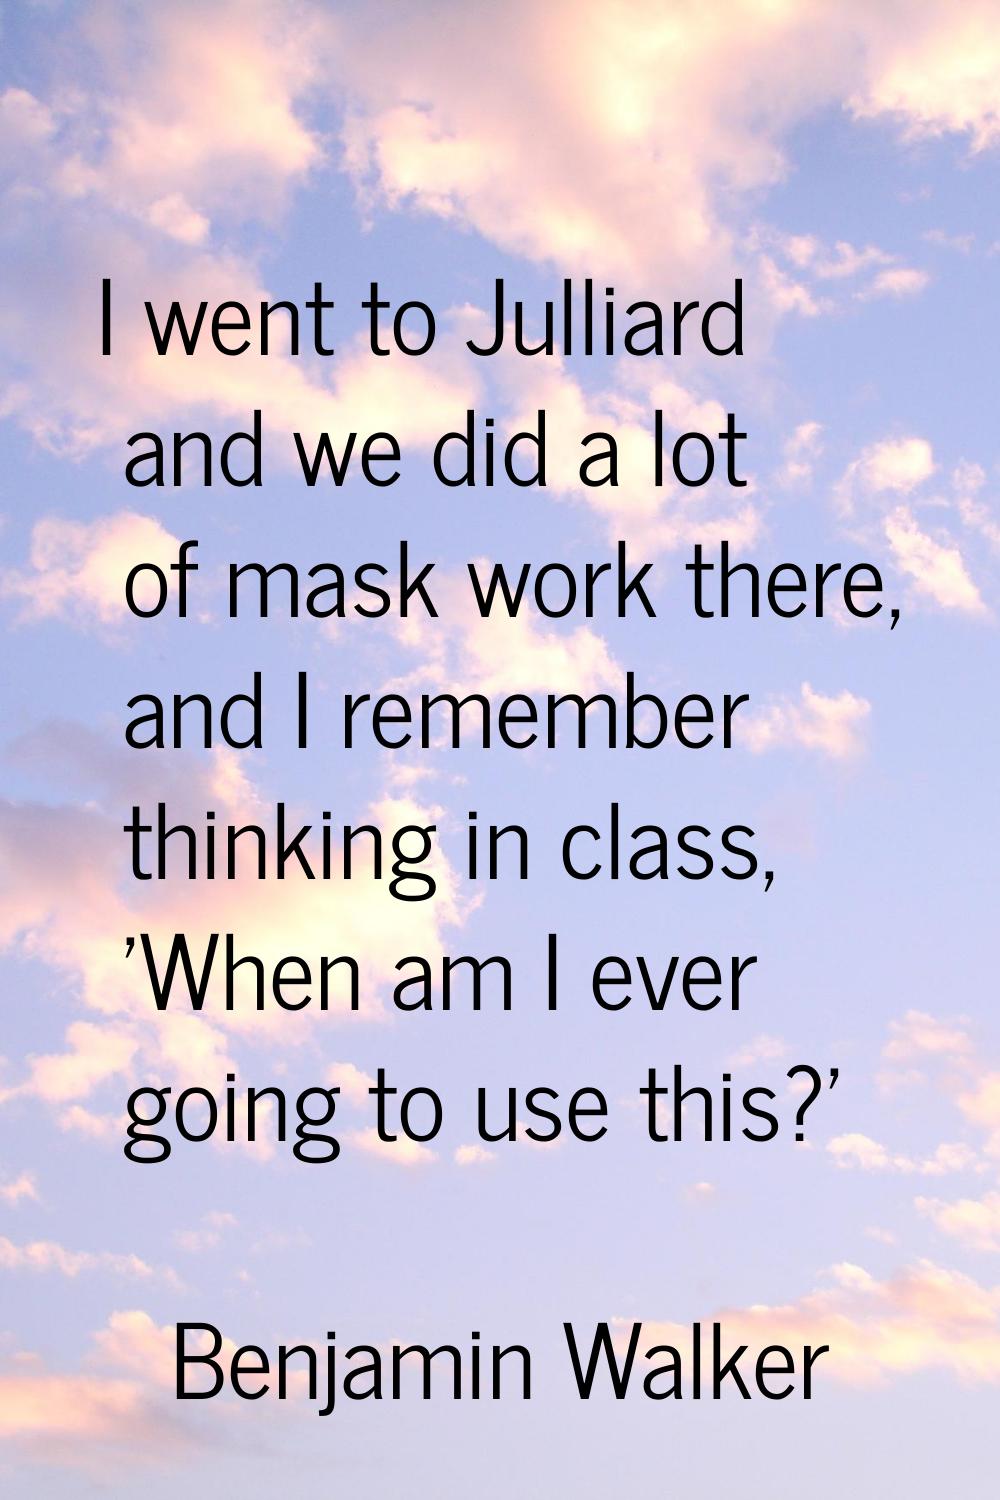 I went to Julliard and we did a lot of mask work there, and I remember thinking in class, 'When am 